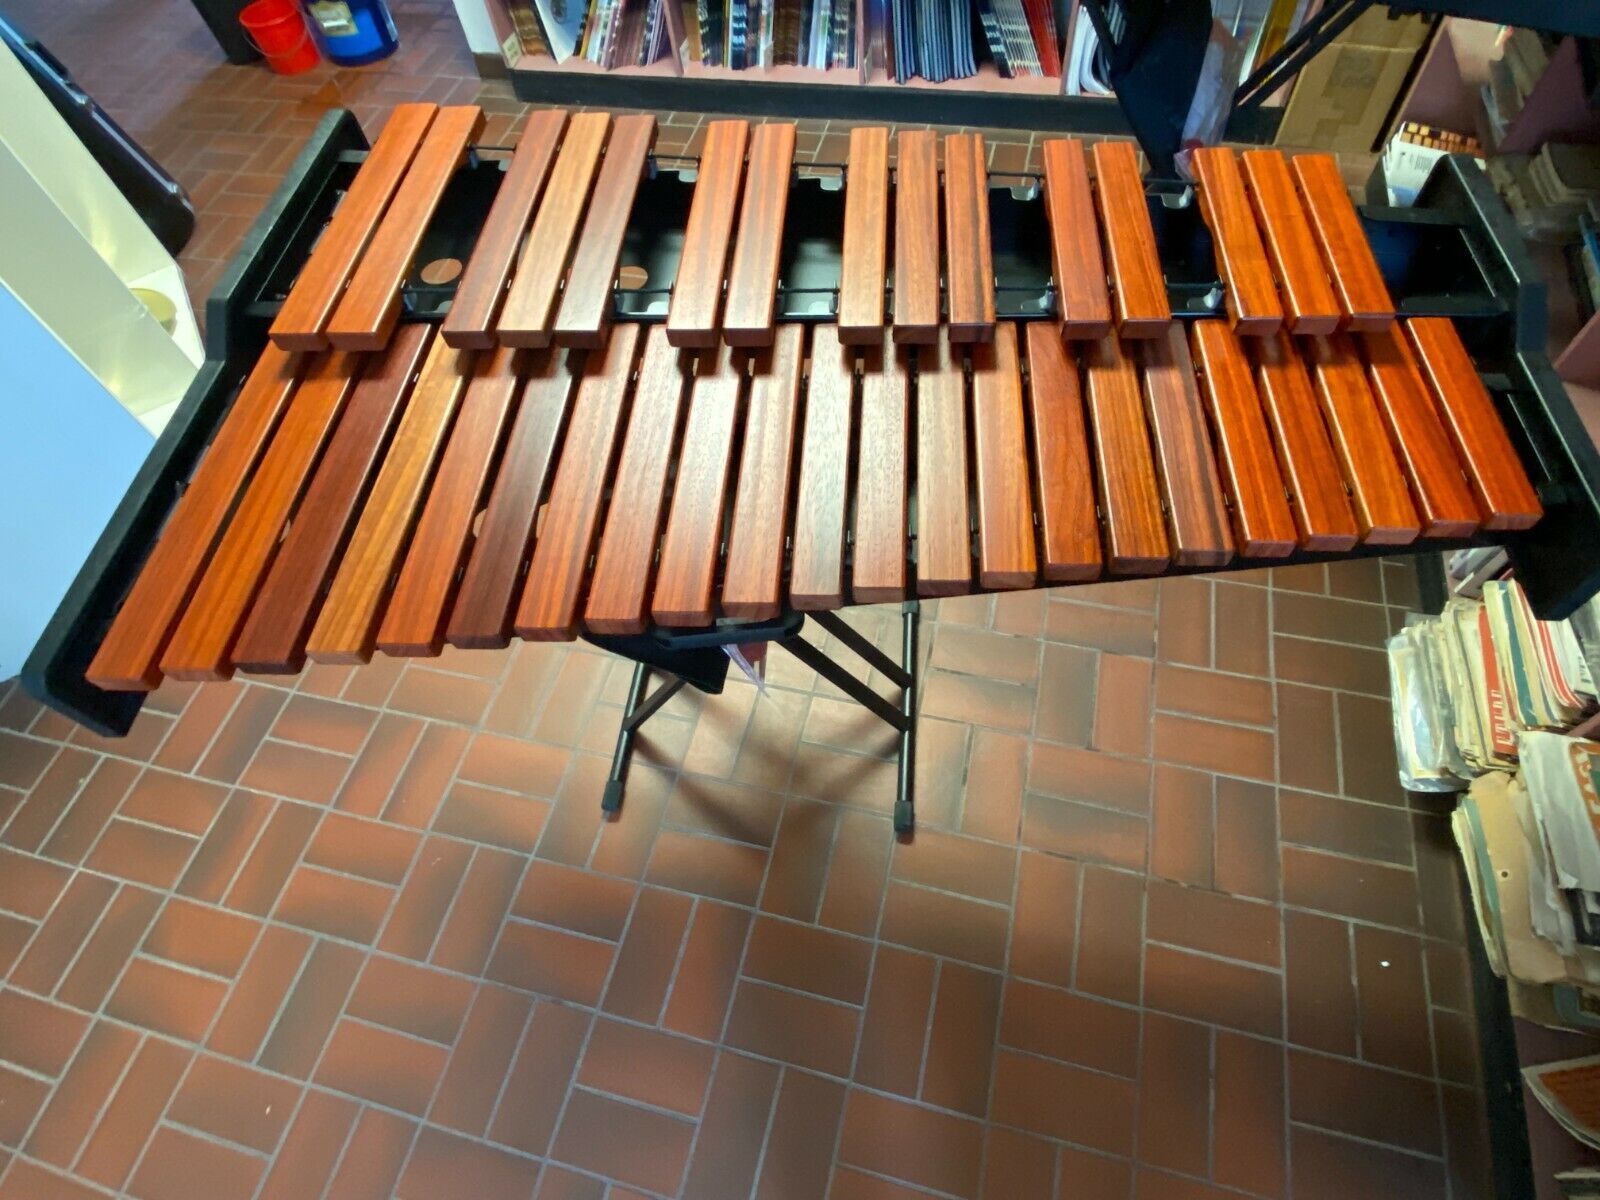 Mint Demo Adams Academy Junior 30 Marimba 3 Octave With Stand, Cover, Mallets